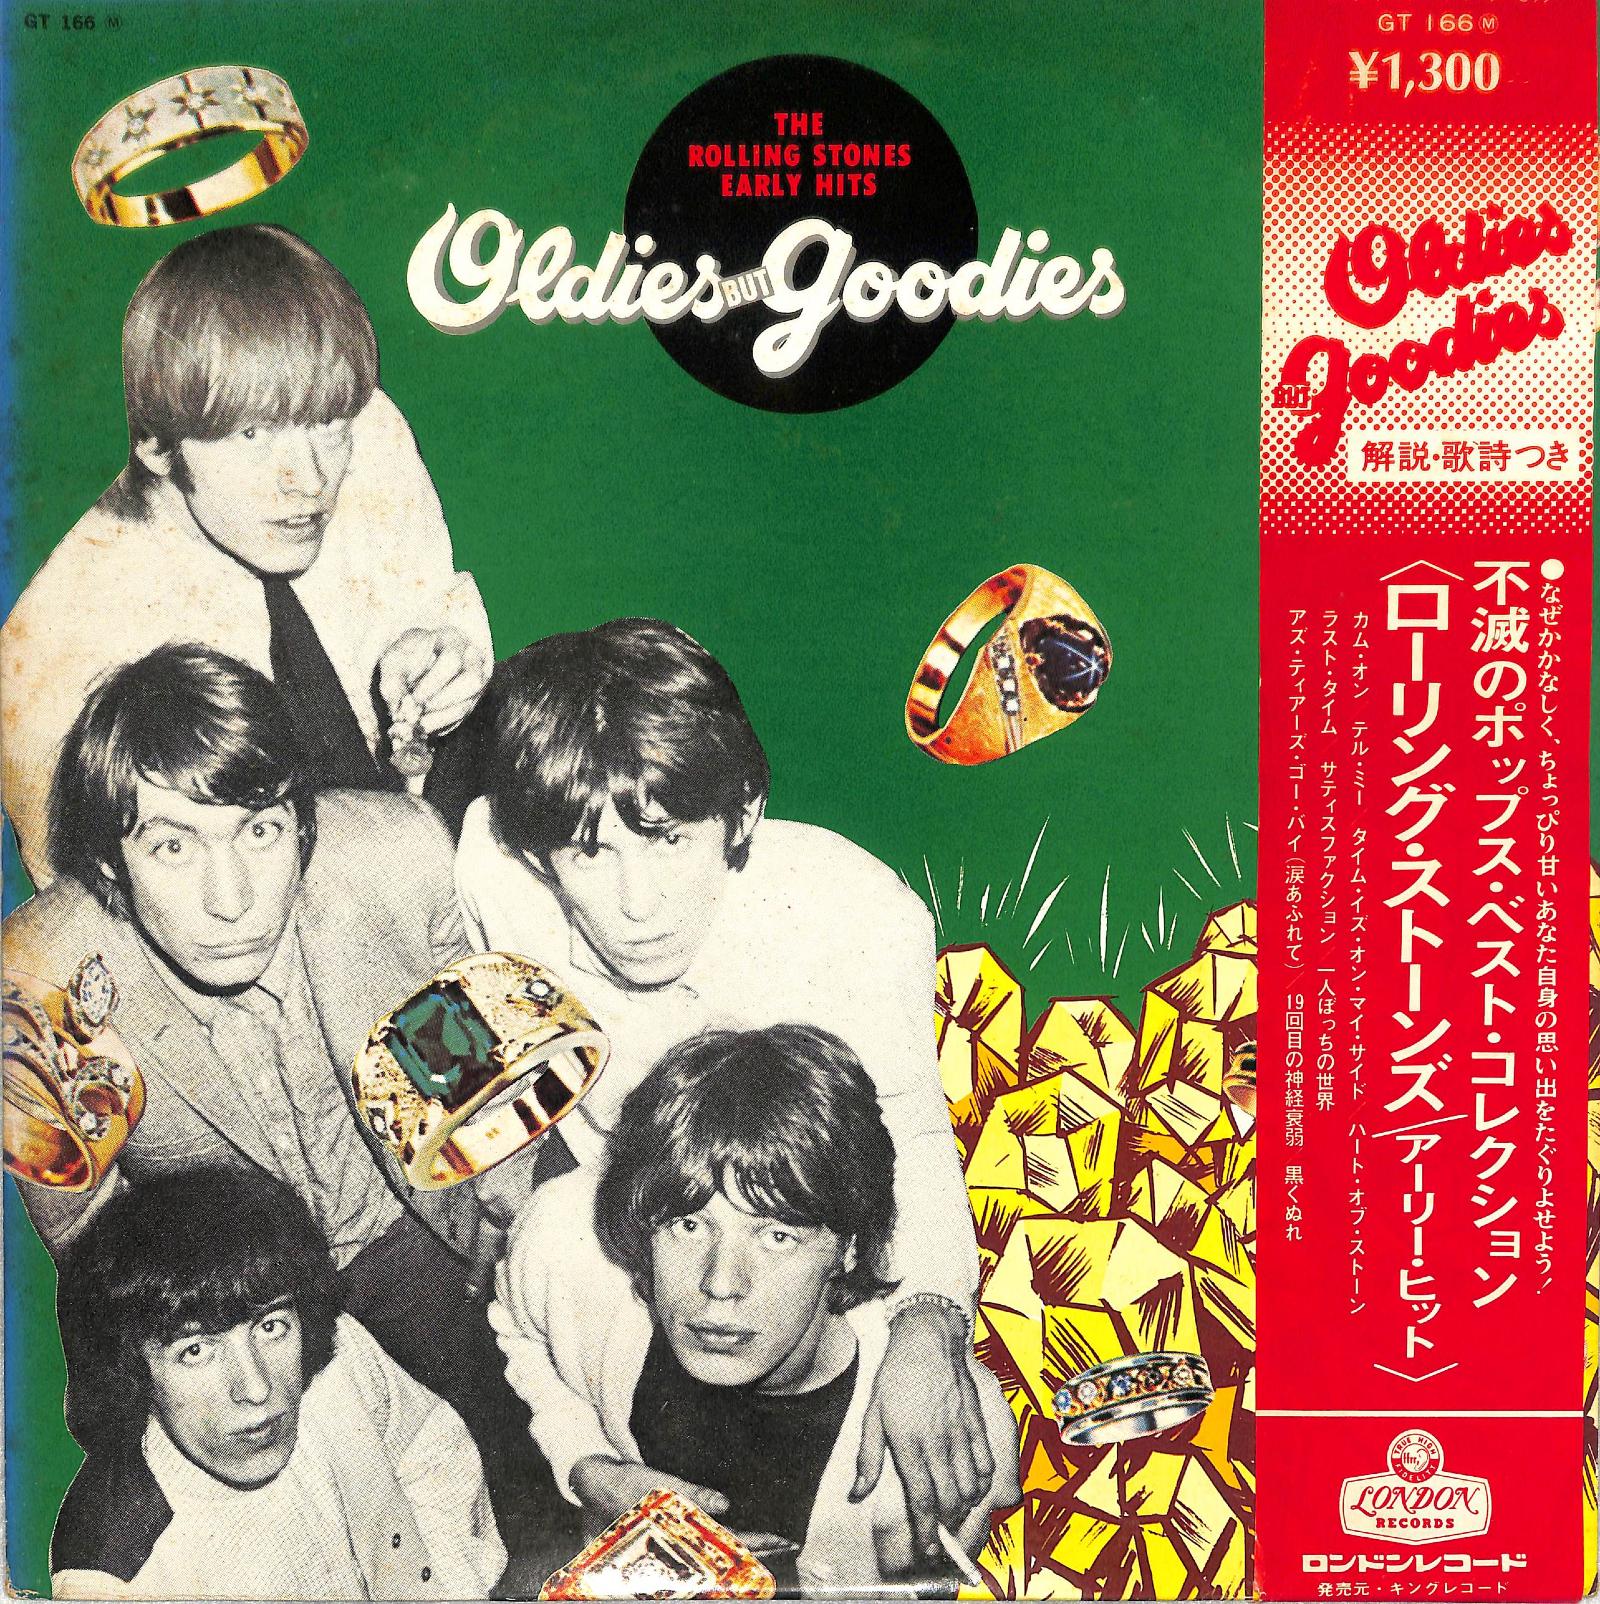 The Rolling Stones - Oldies But Goodies (The Rolling Stones Early Hits)